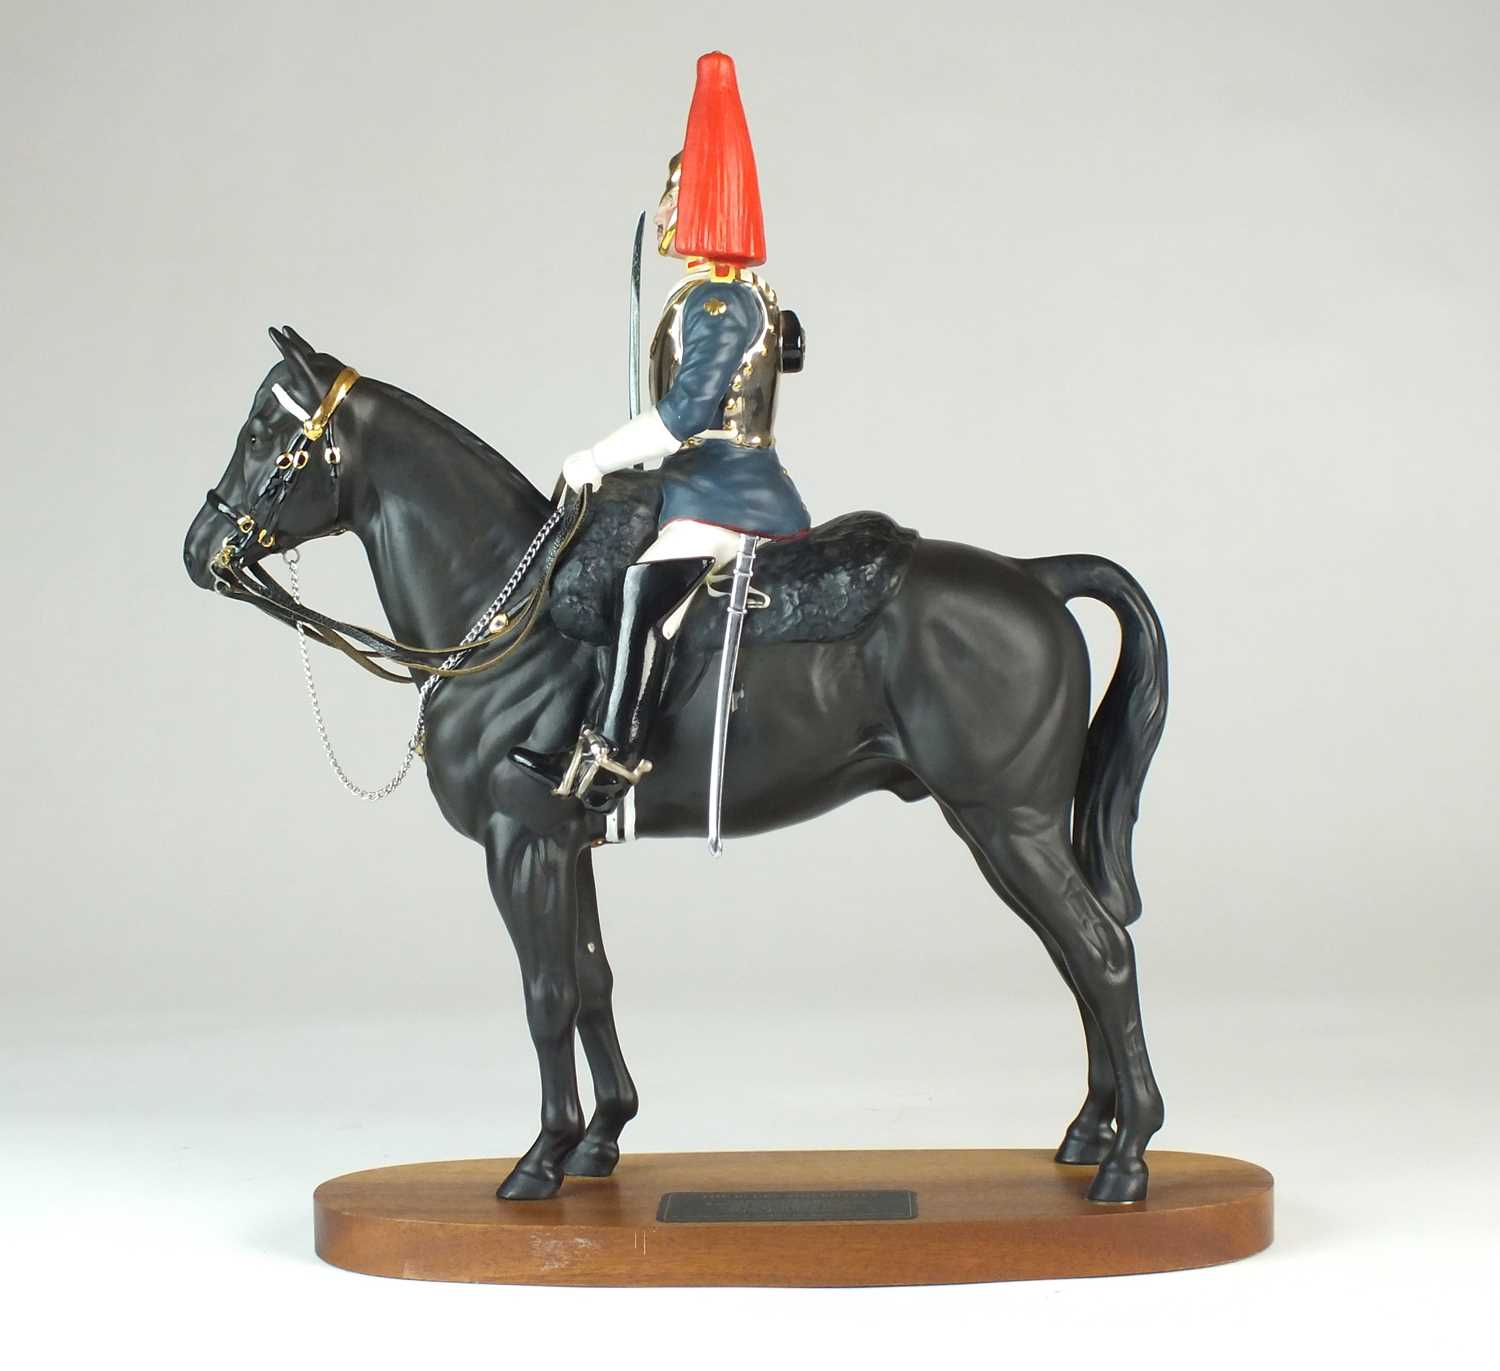 Lot 152 - Beswick Connoisseur 'Blues and Royals' model